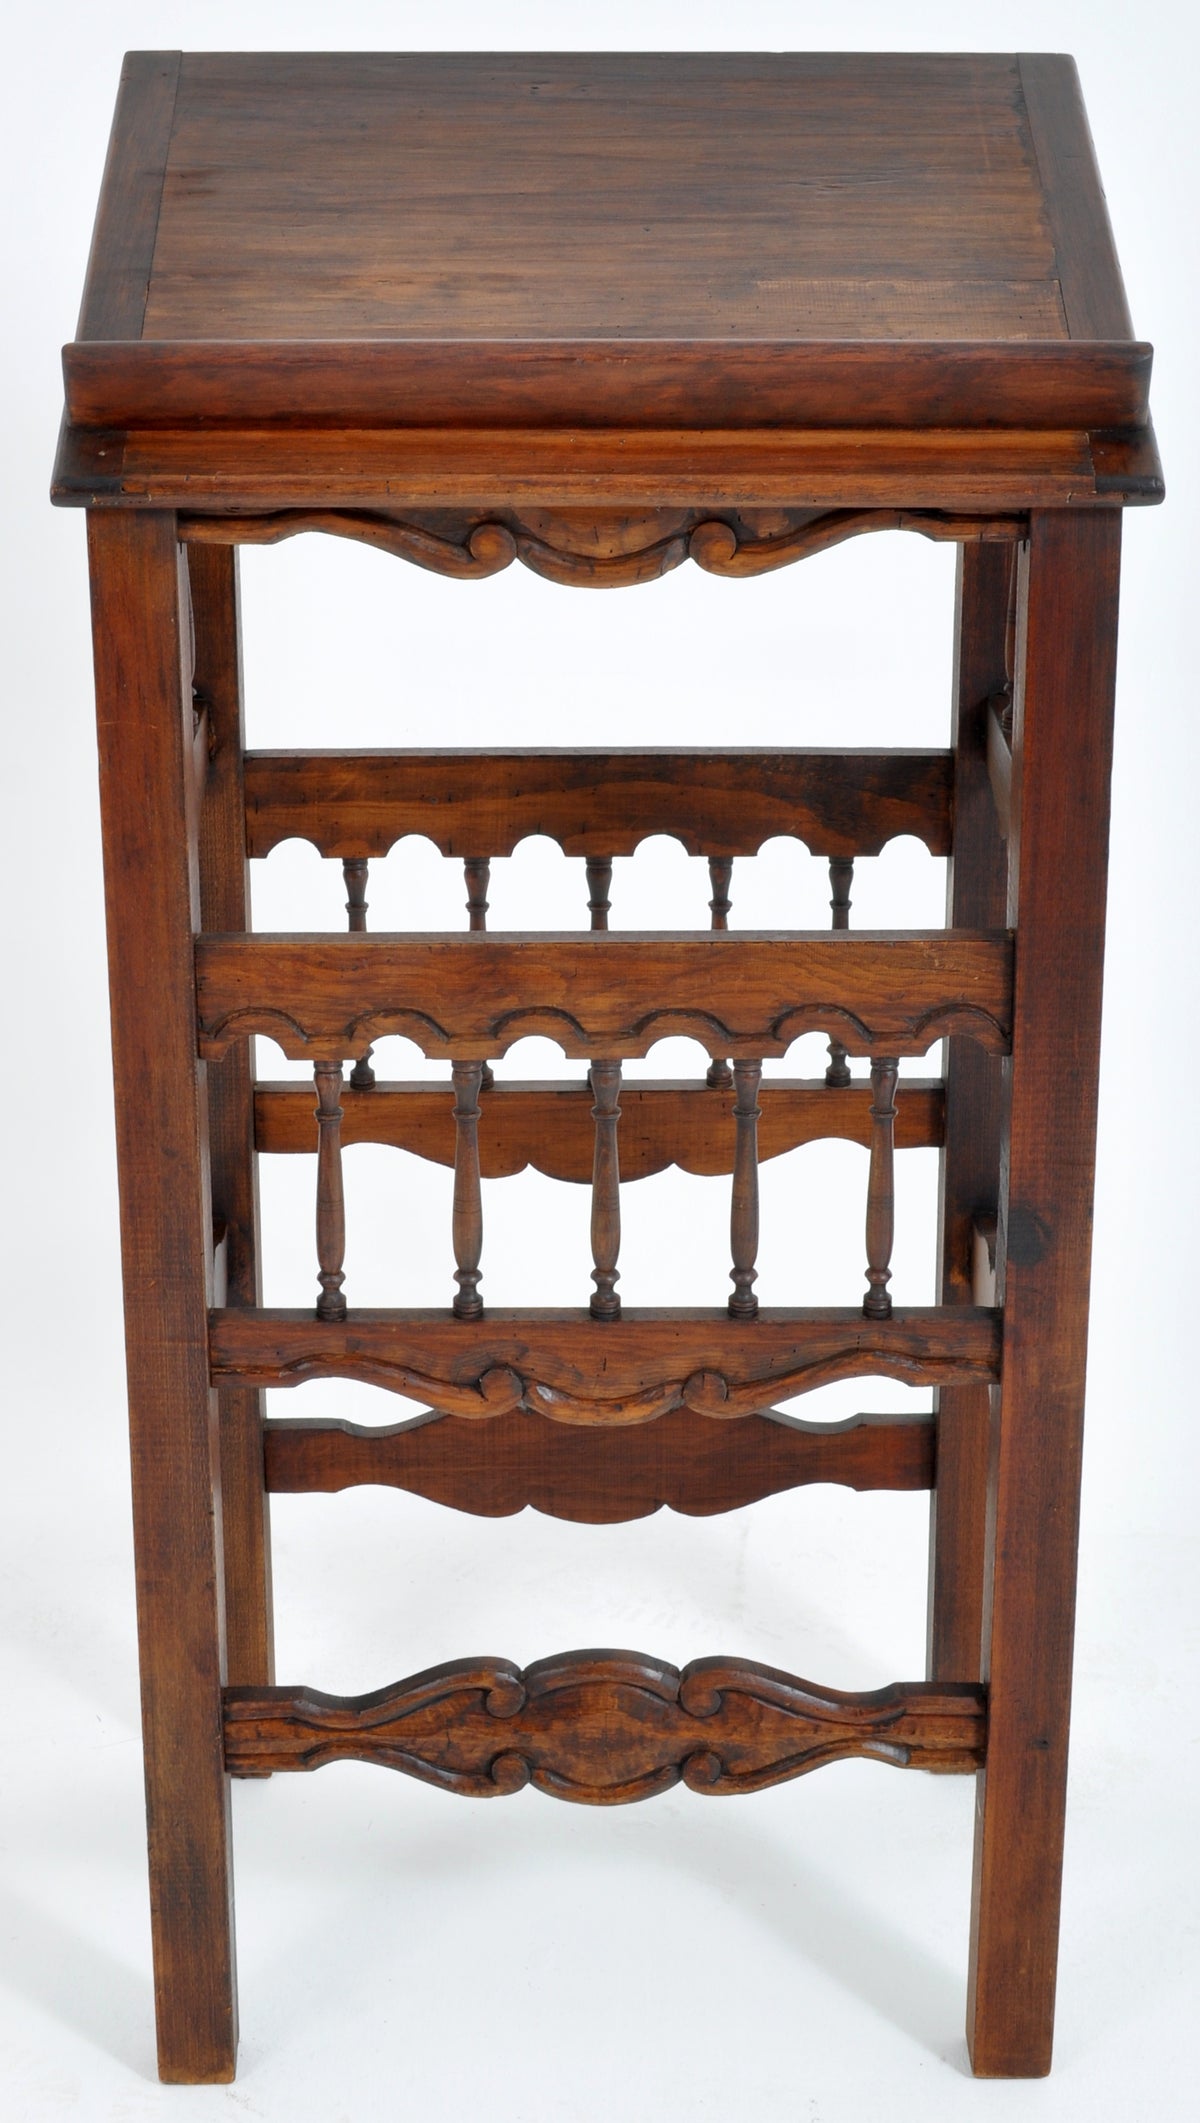 Antique French Provincial Walnut Lectern / Book / Music Stand, Circa 1880